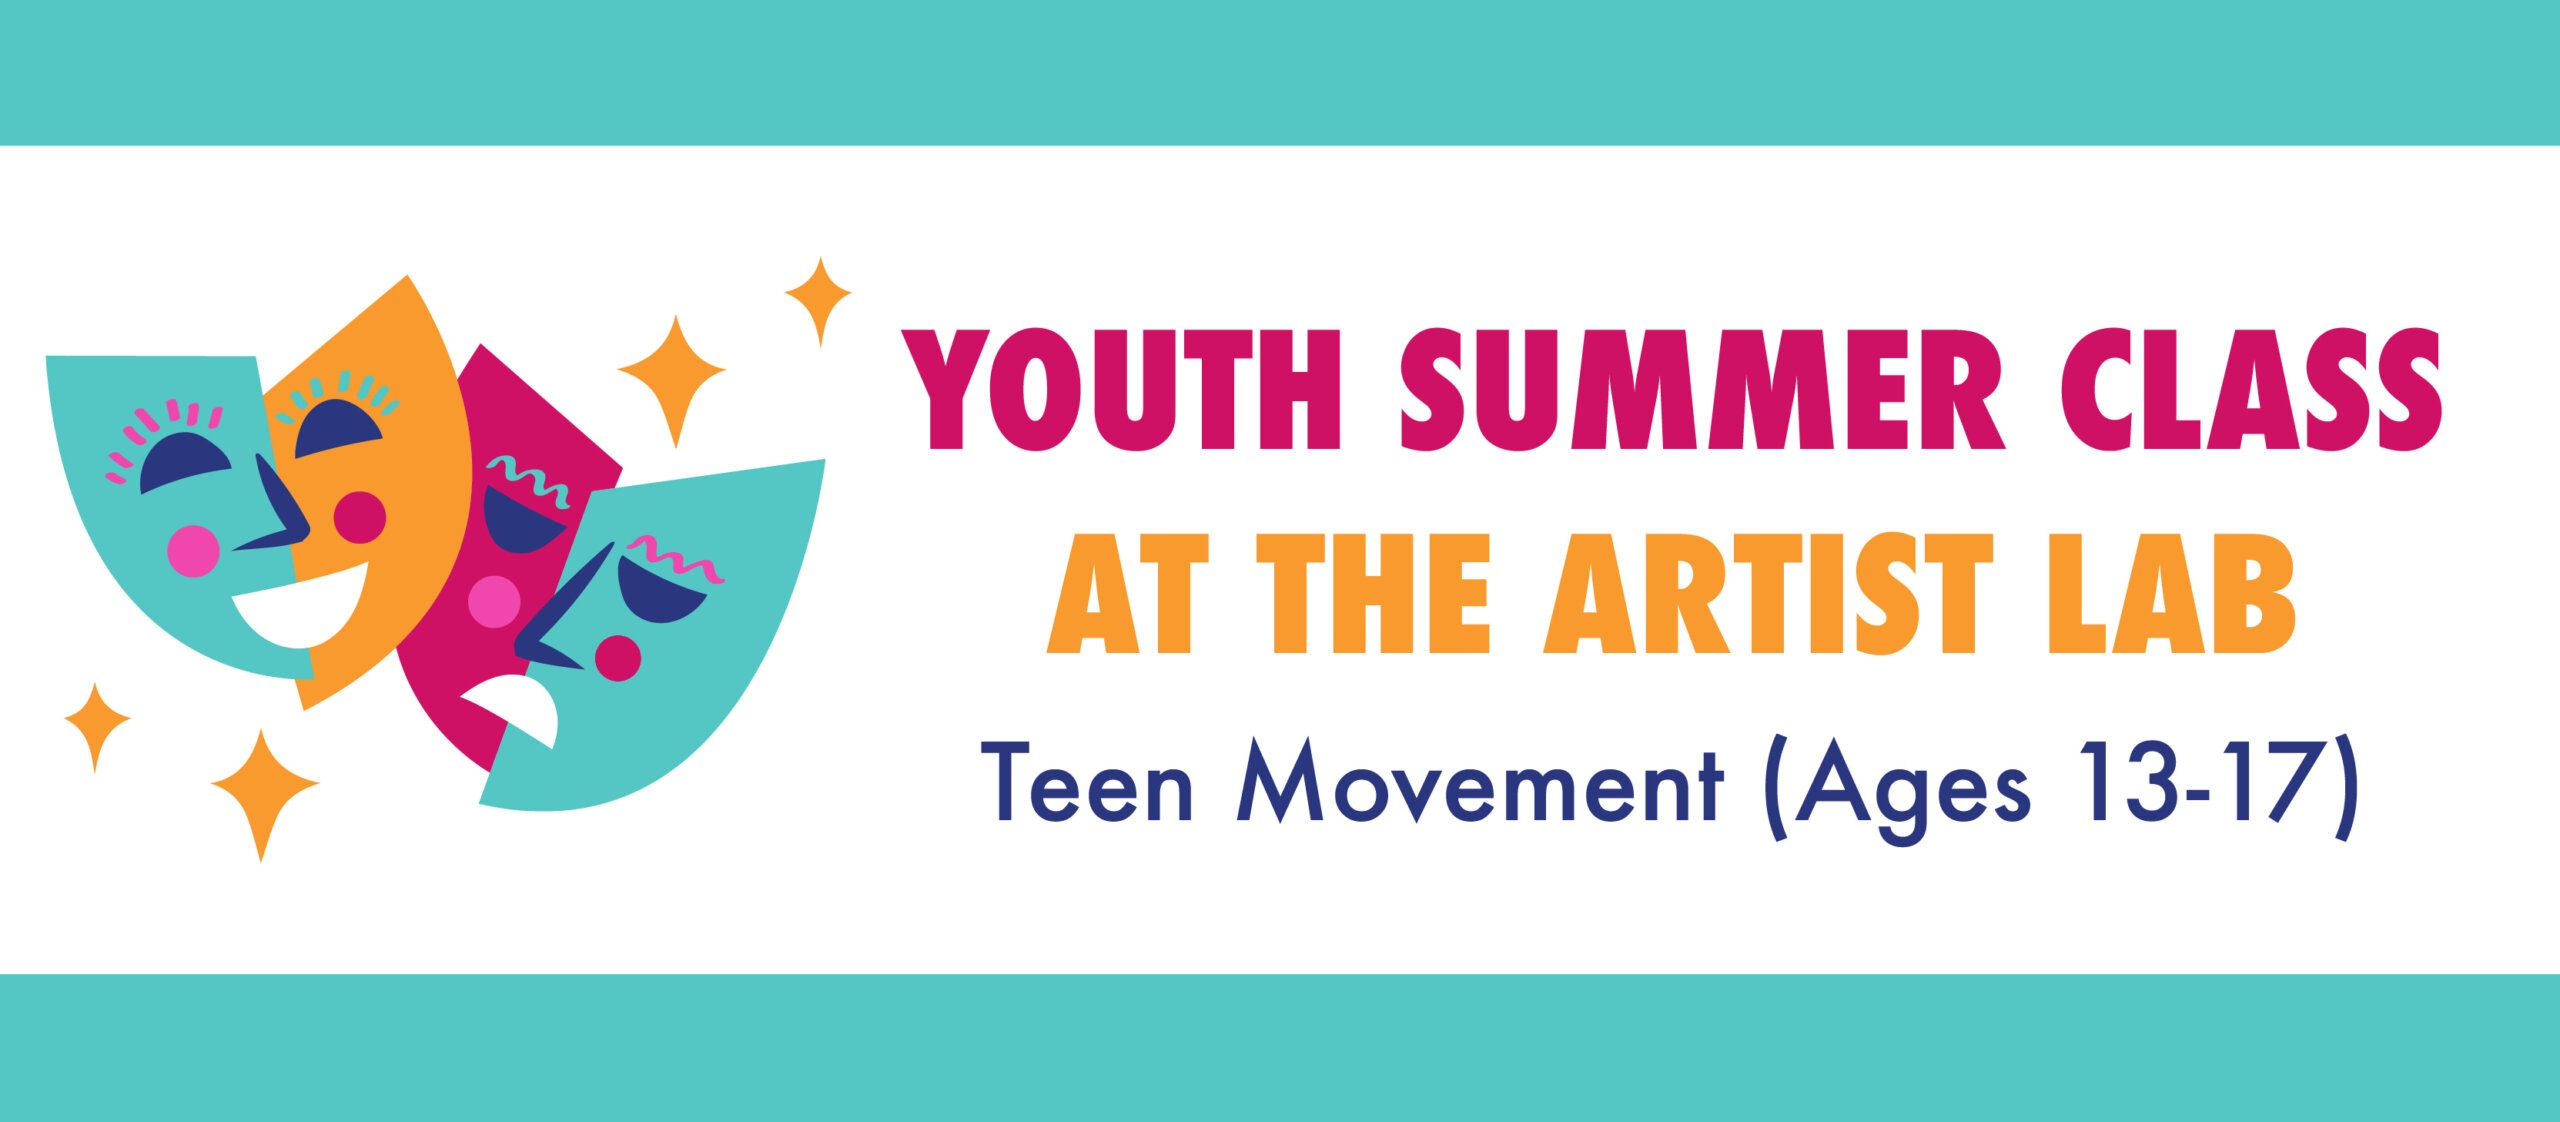 Artist Lab: Youth Summer Class Teen Movement (Ages 13-17)